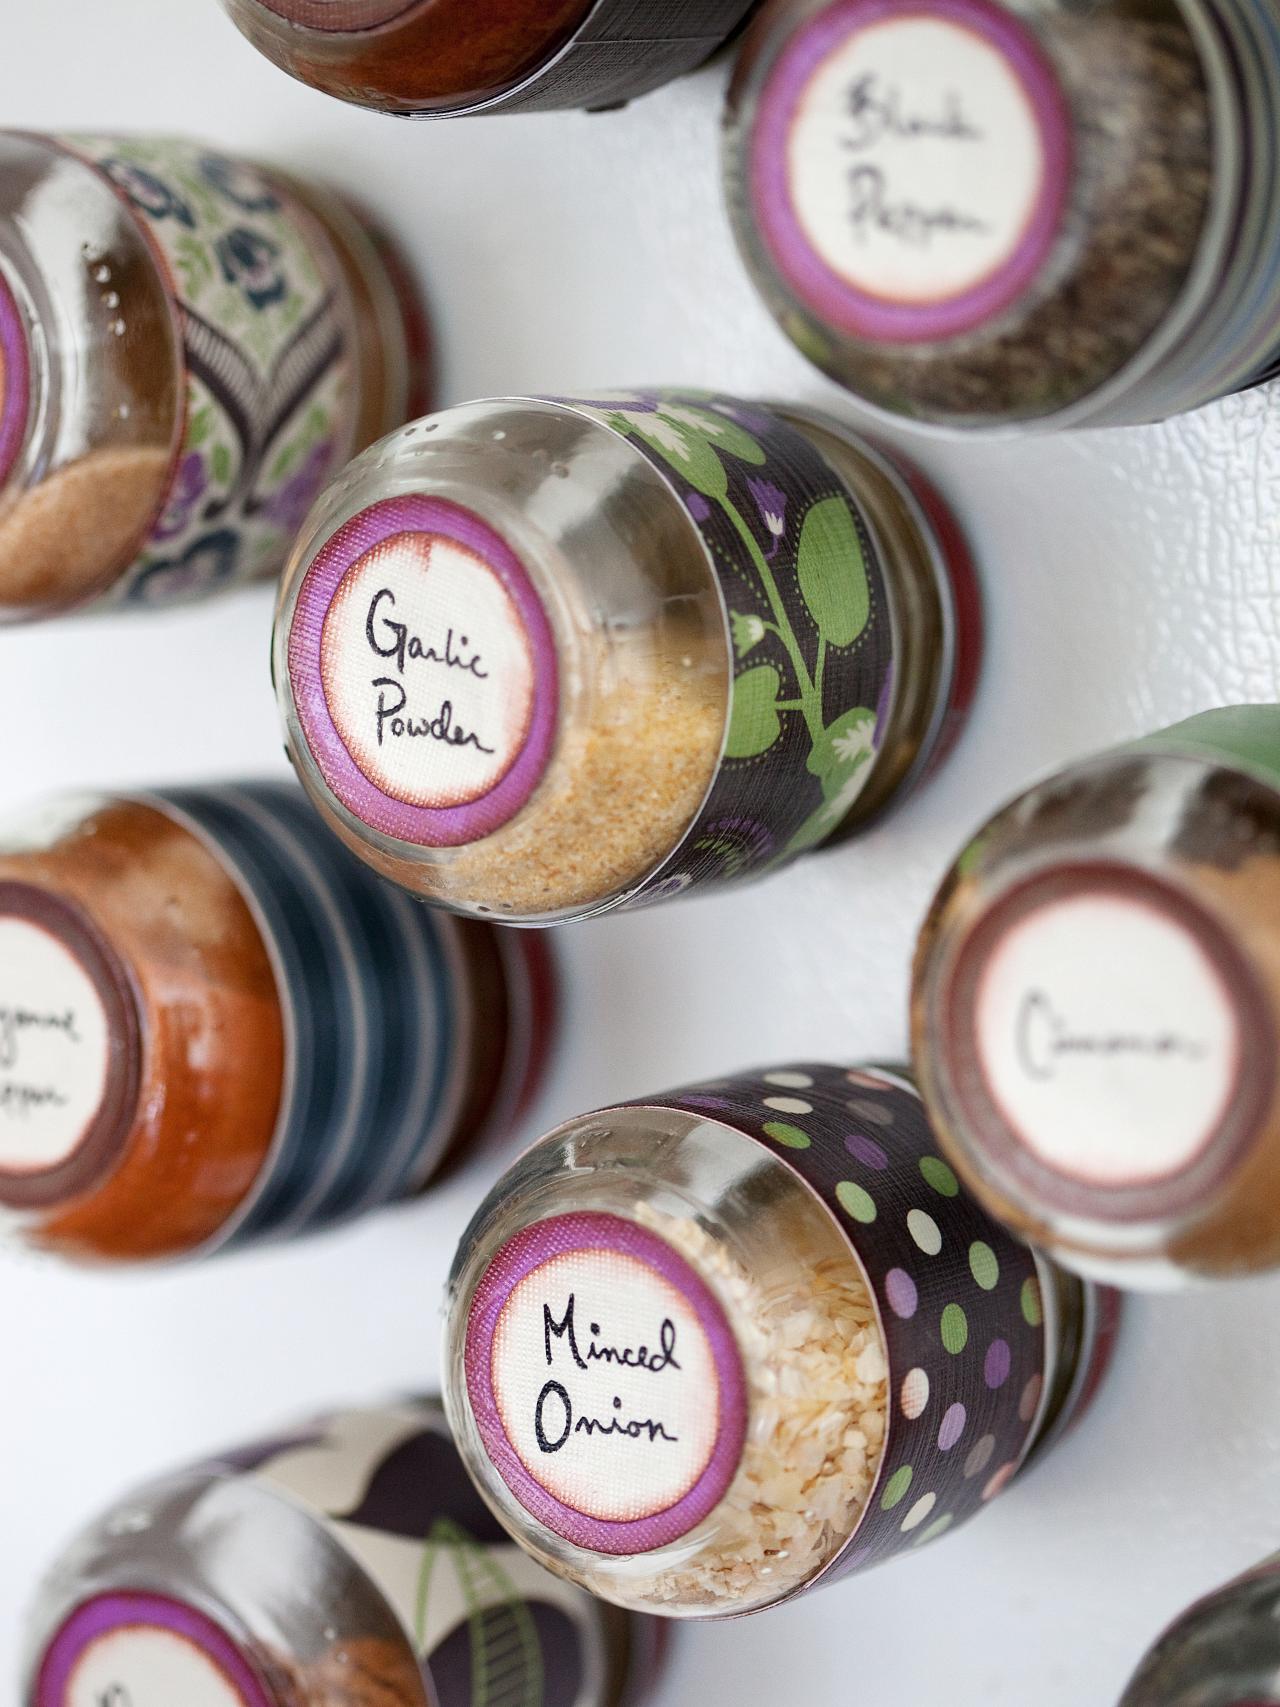 Baby food jars are great for storing spices. Source: HGTV